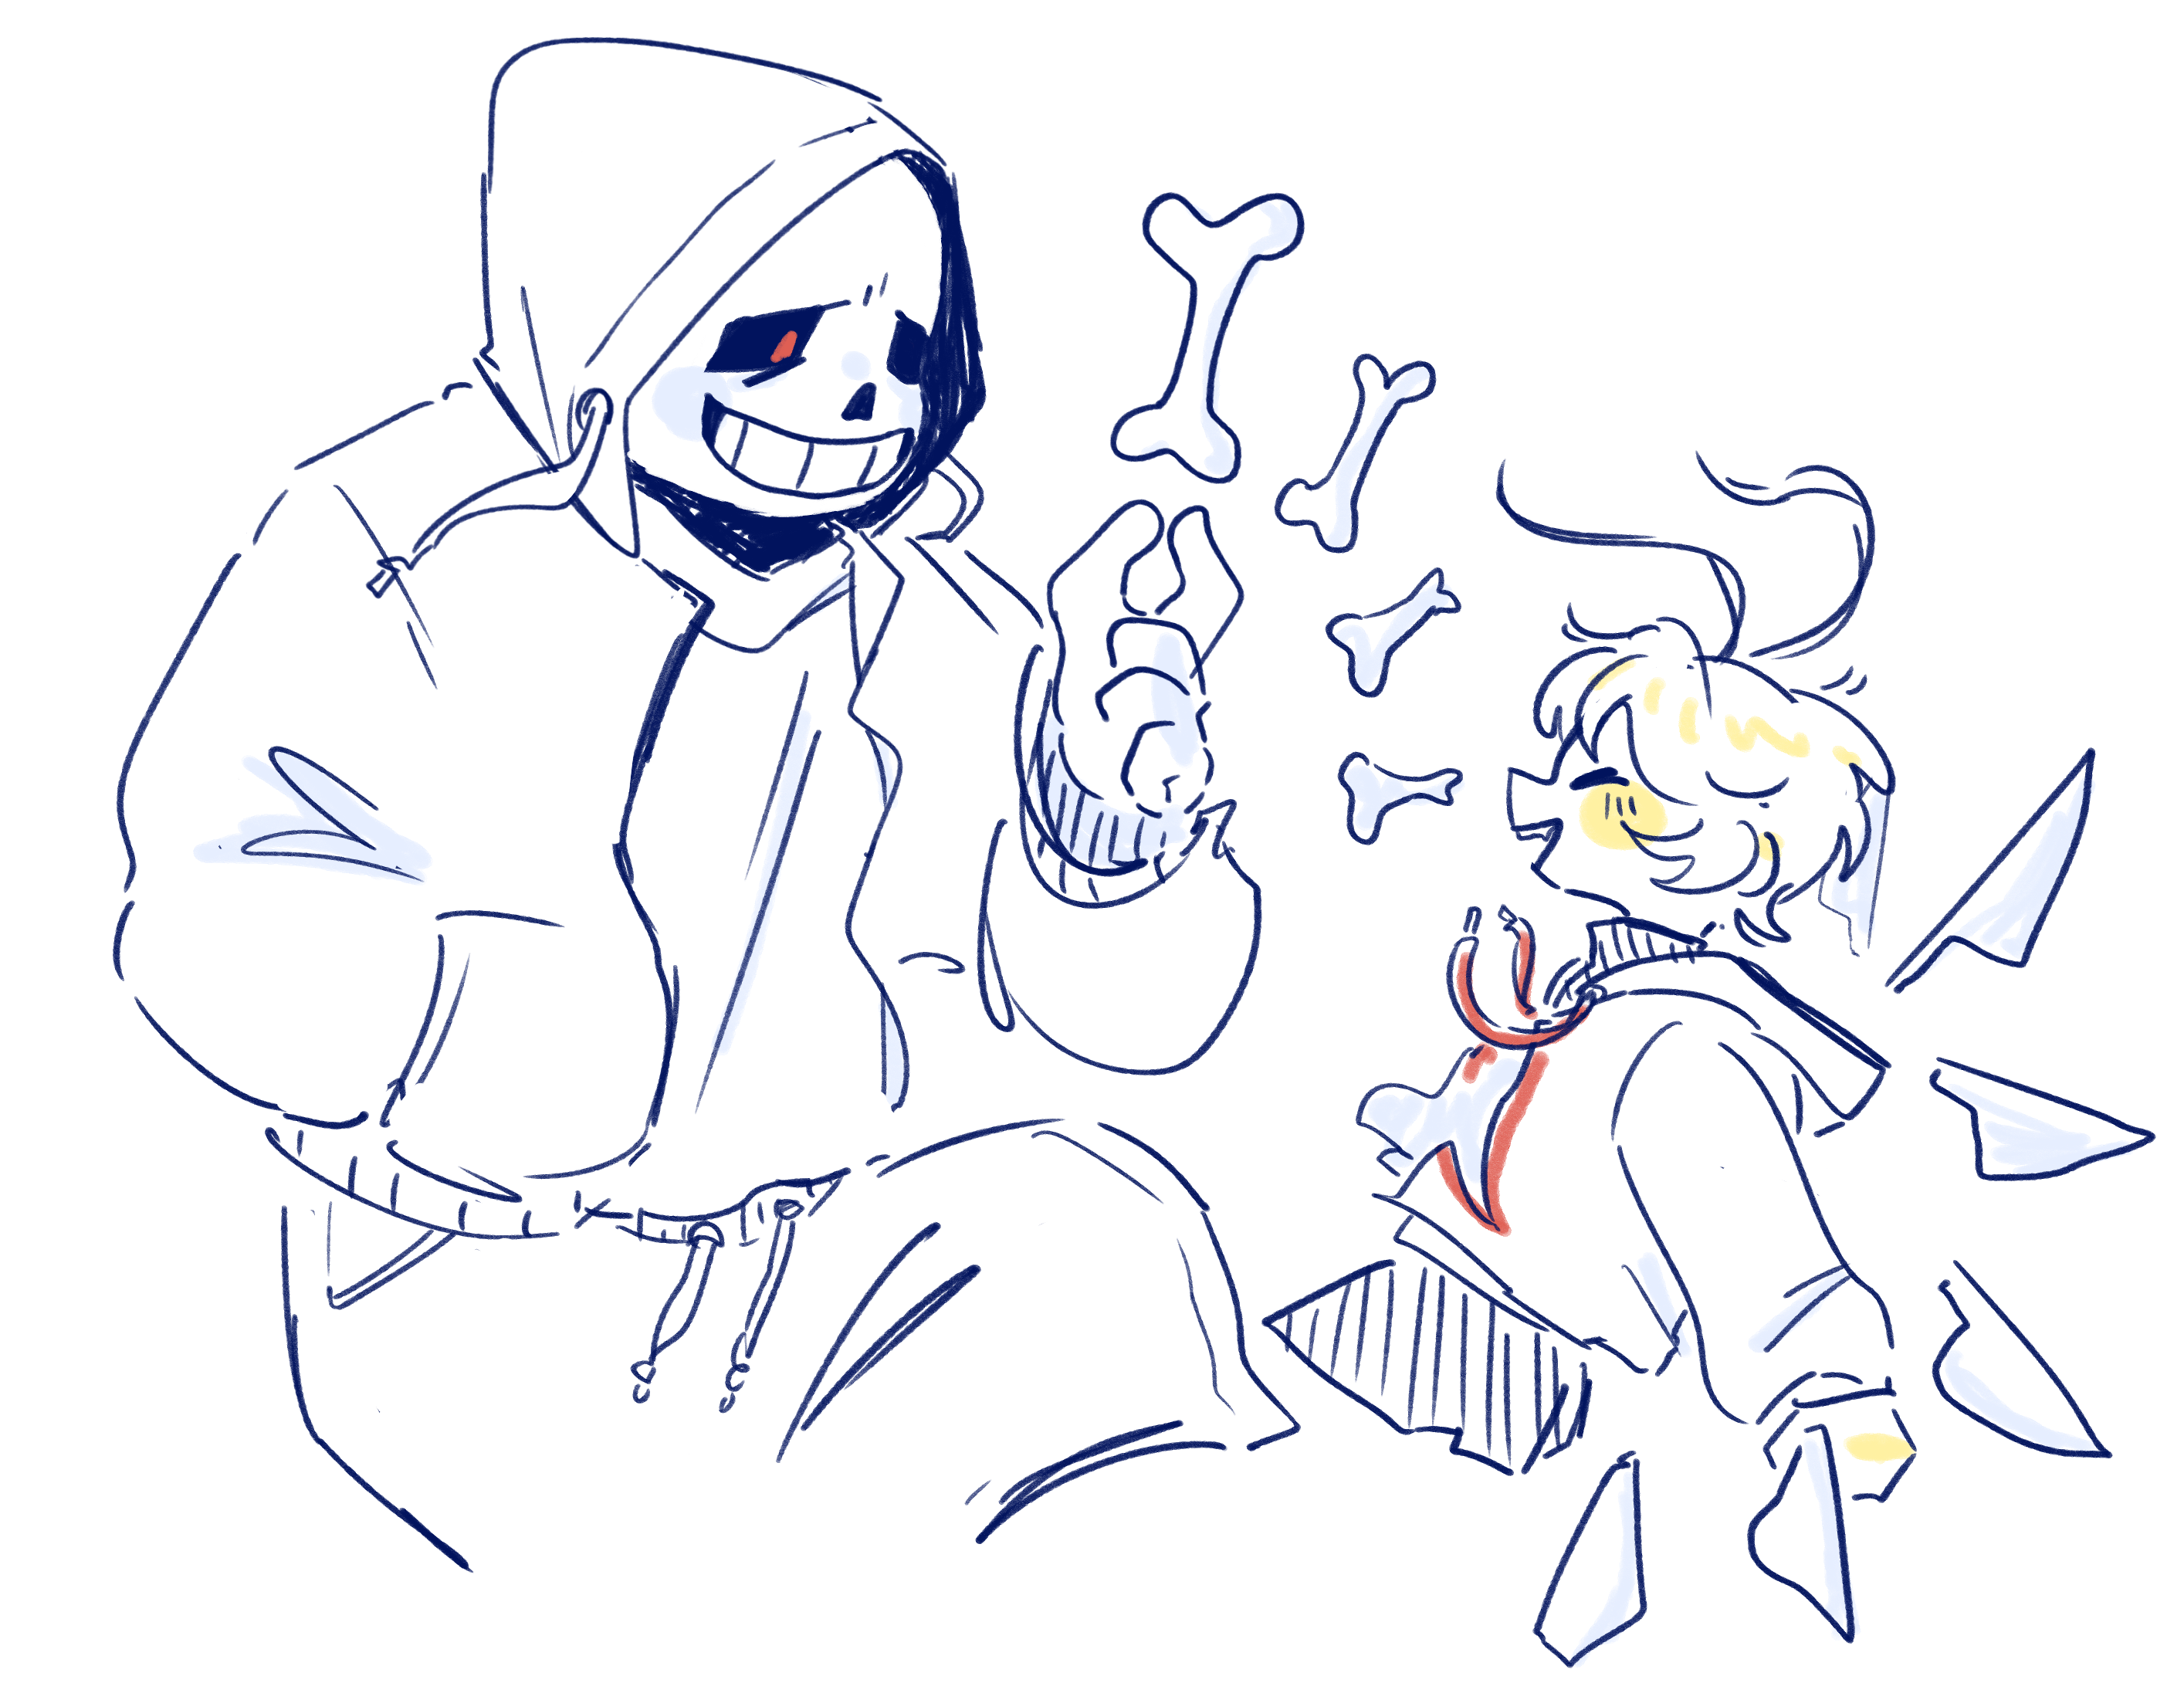 Sans and Gokiburi-chan in their Dusttale costumes